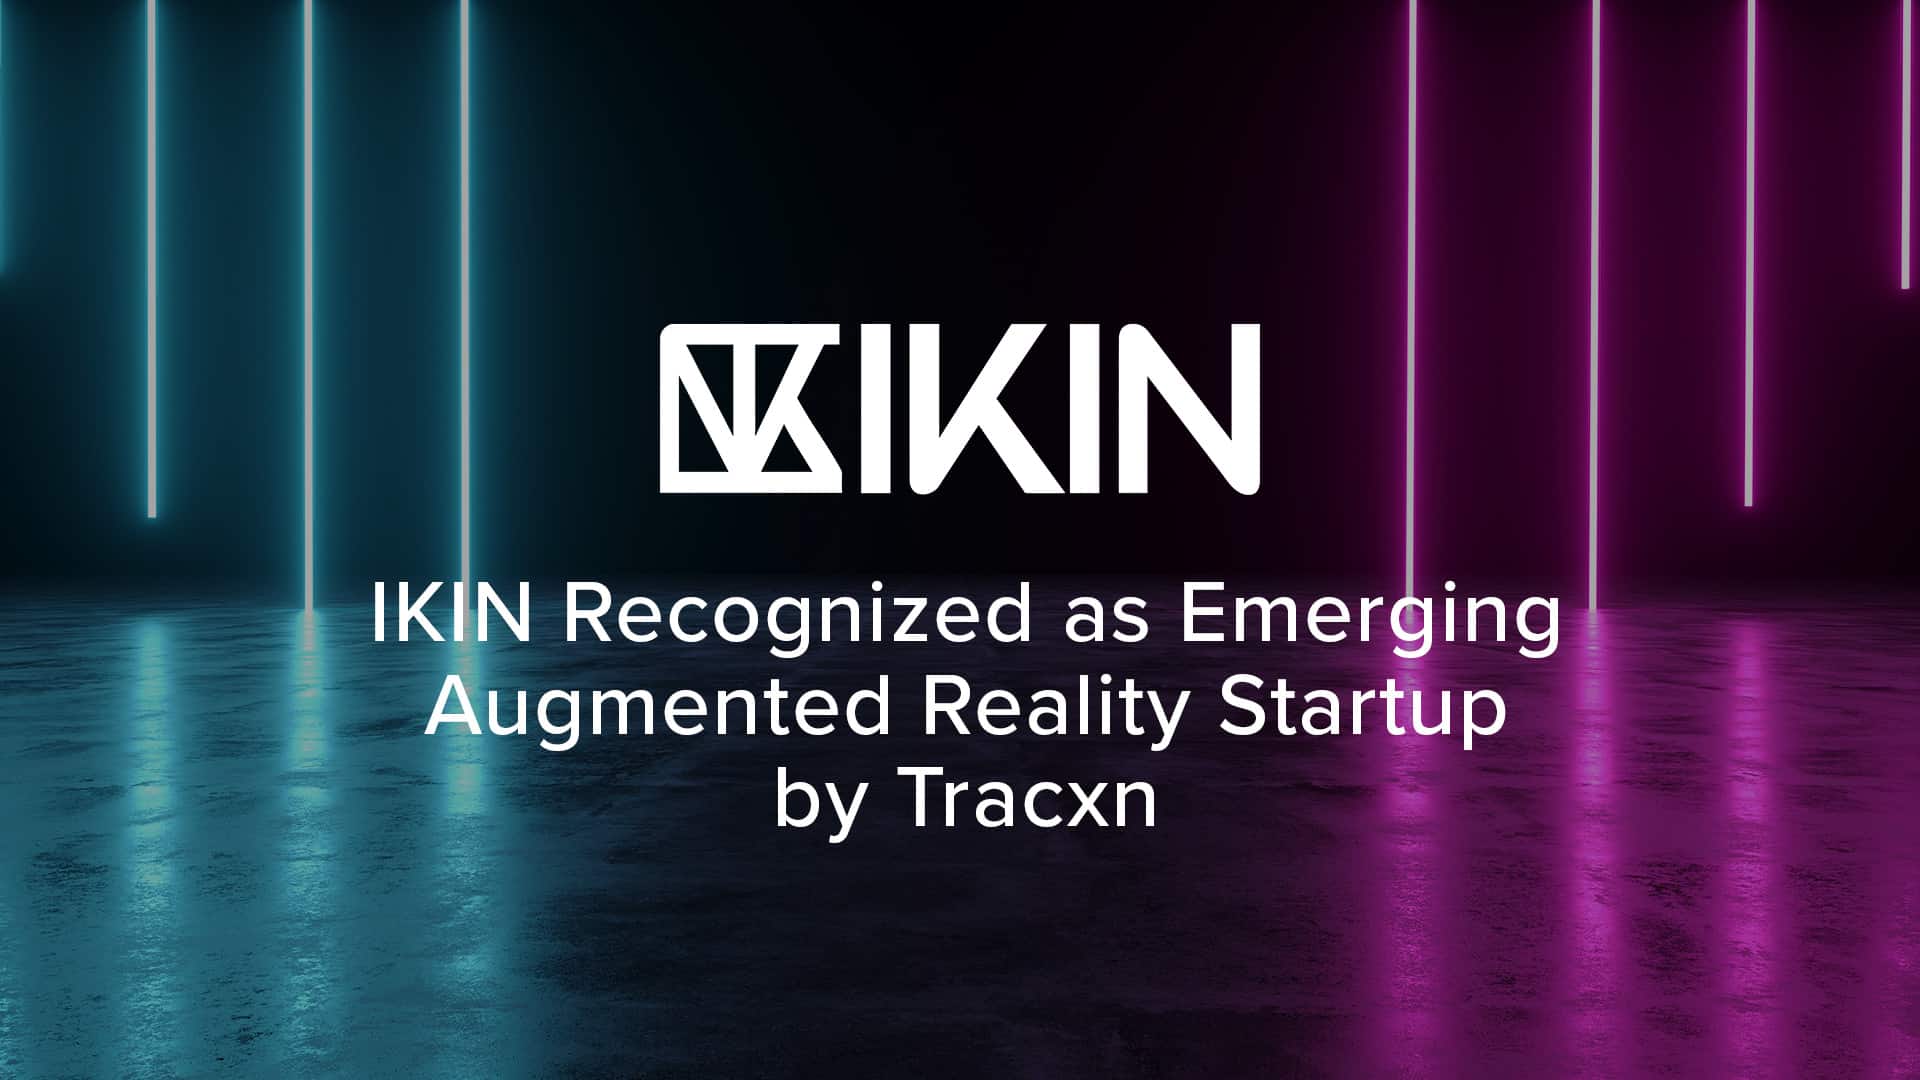 IKIN Recognized as Emerging Augmented Reality Startup by Tracxn